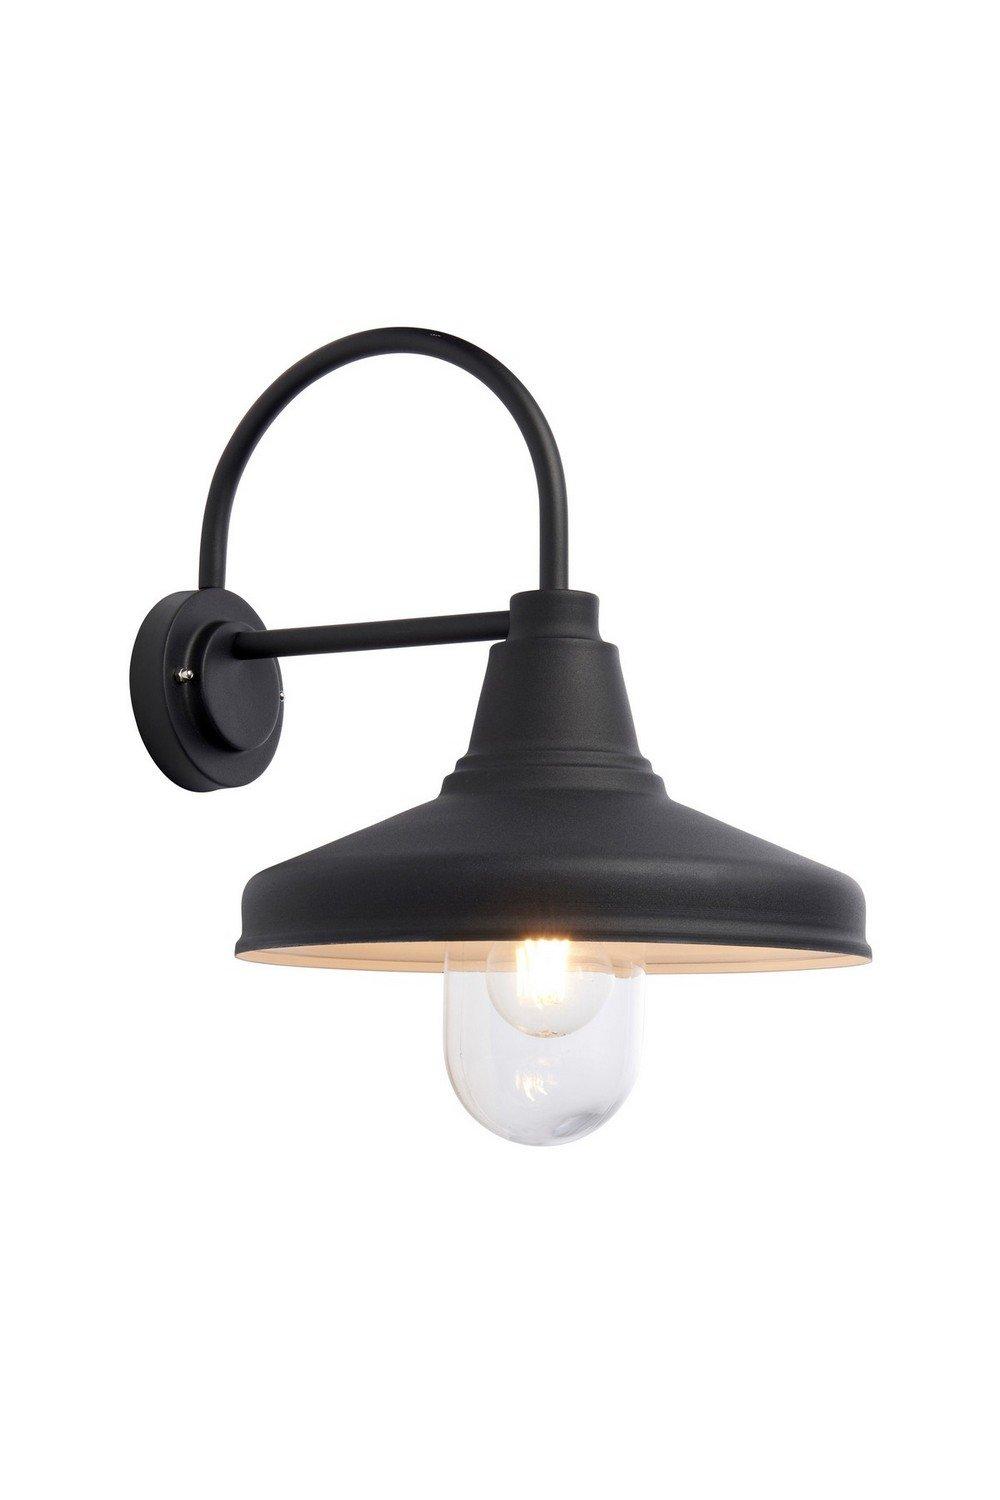 Farmhouse Traditional Outdoor Dome Wall Light Textured Black Glass Shade IP44